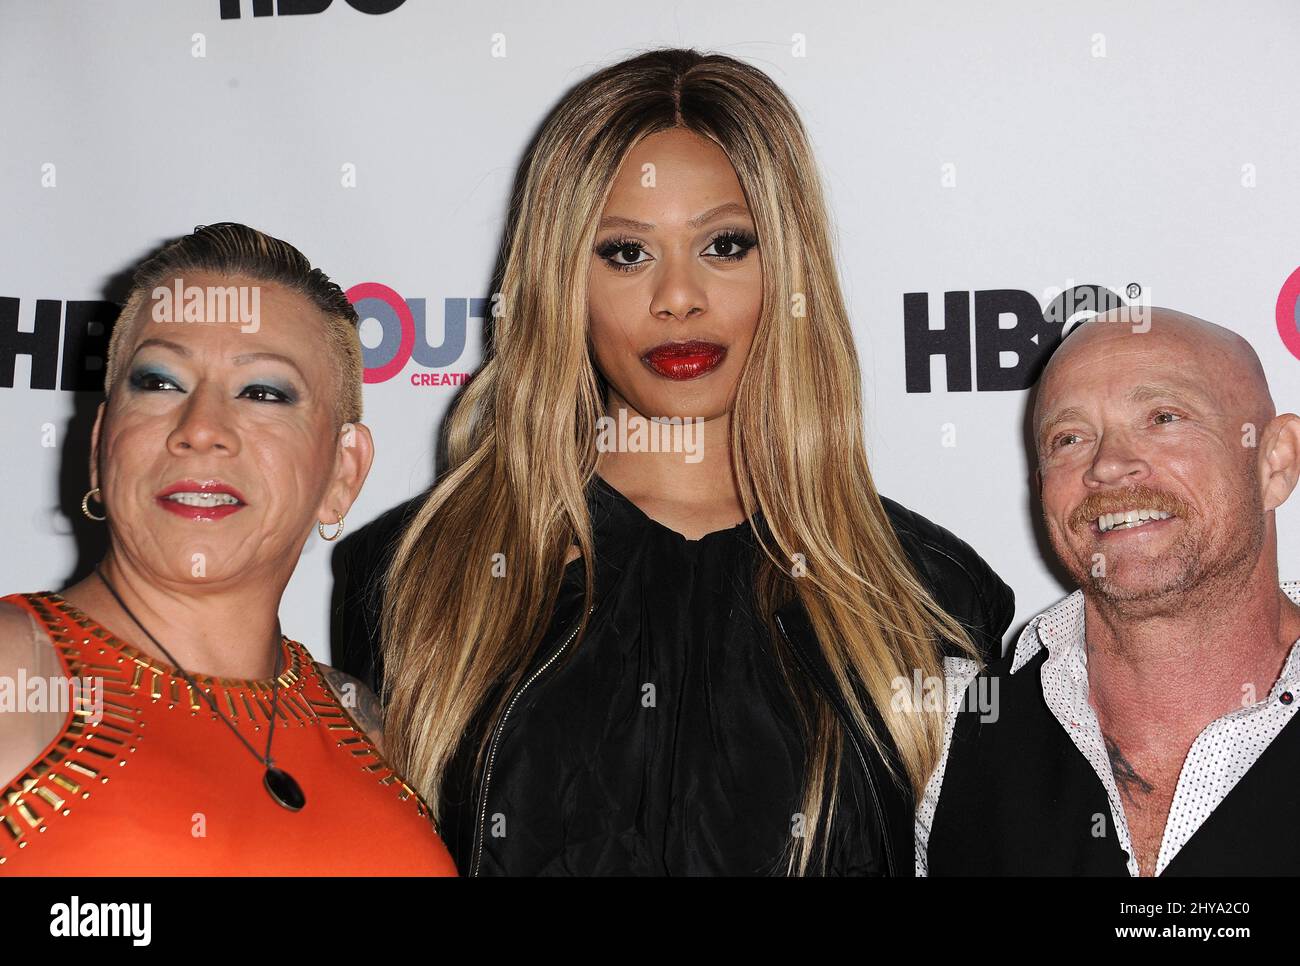 Bamby Salcedo, Laverne Cox, Buck Angel attending the 2016 Outfest Los Angeles LGBT Film Festival Screening of 'The Trans List' held at Directors Guild of America in Los Angeles, California. Stock Photo